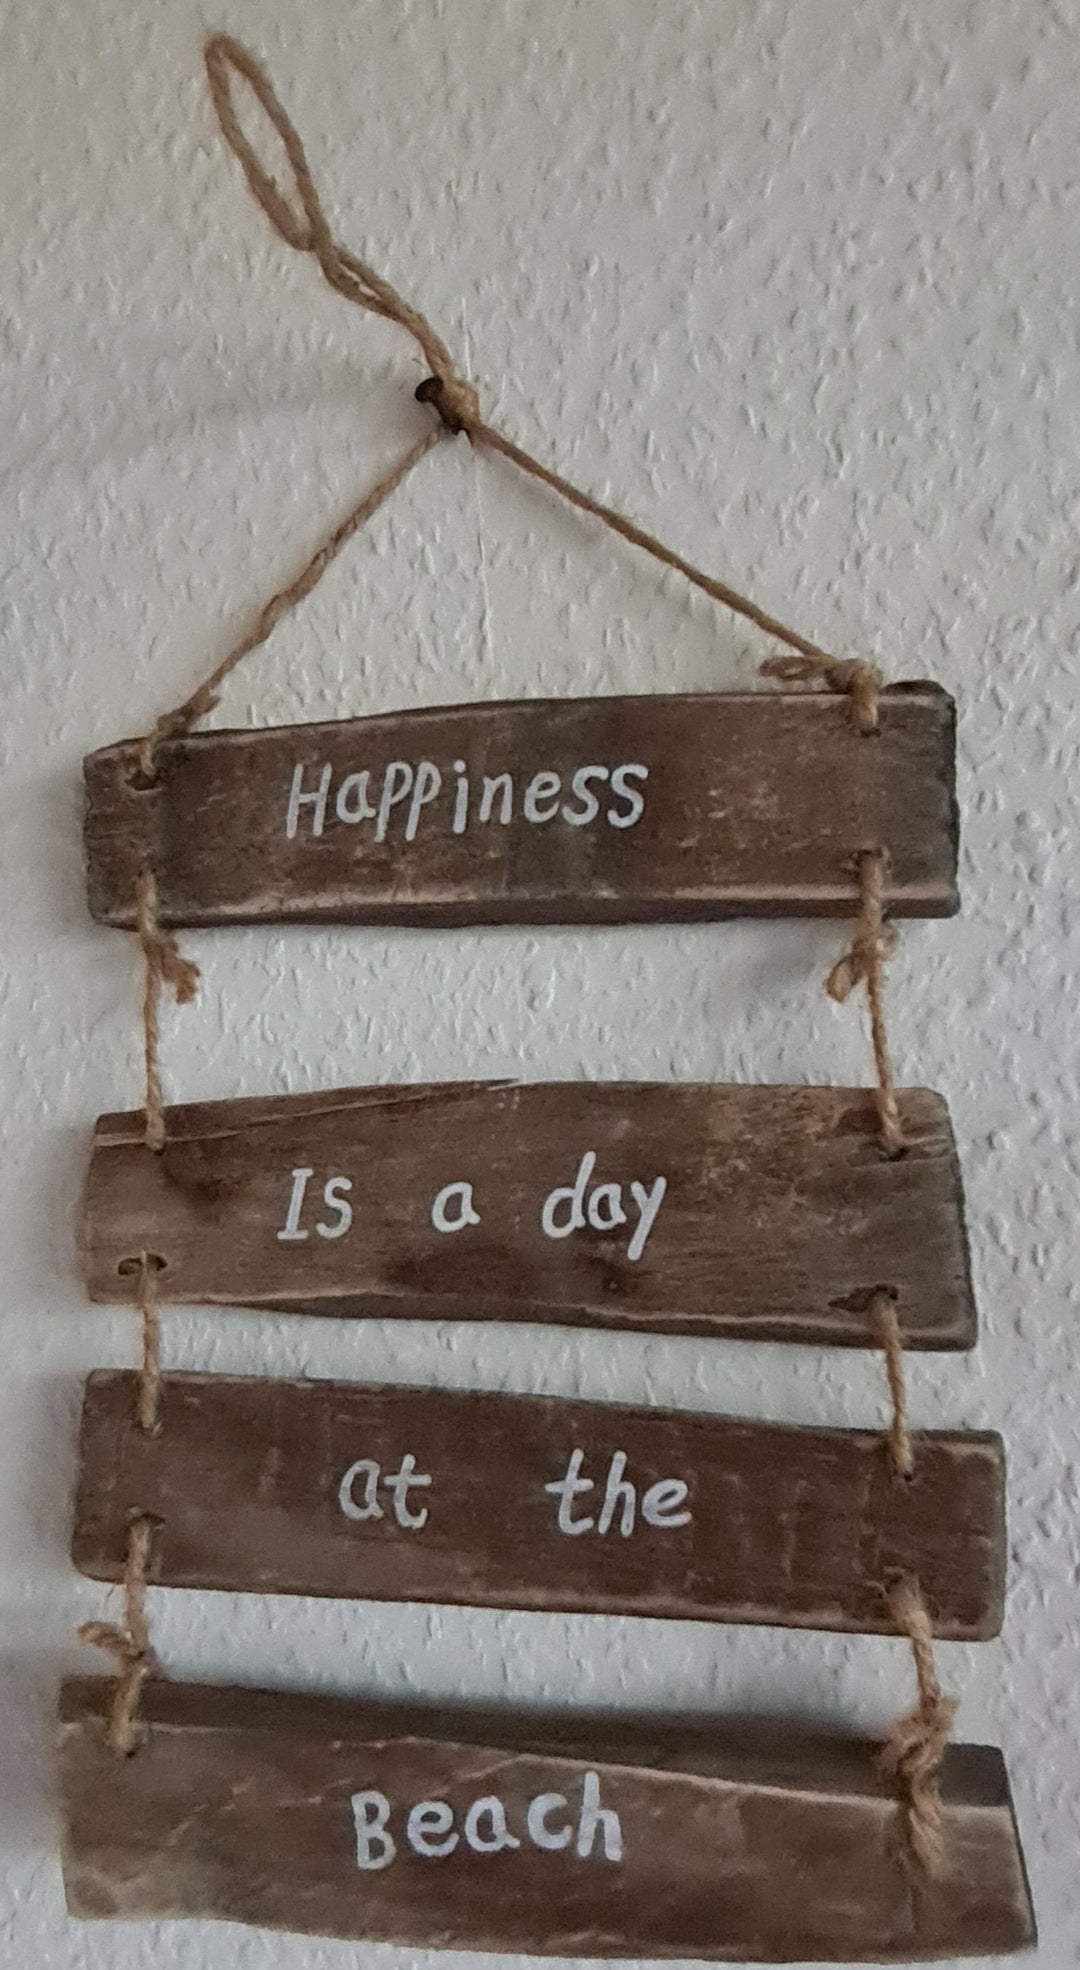 Wand-Deko Treibholz " Happiness is a day at the Beach" - British Moments / Fernweh-Kaufhaus